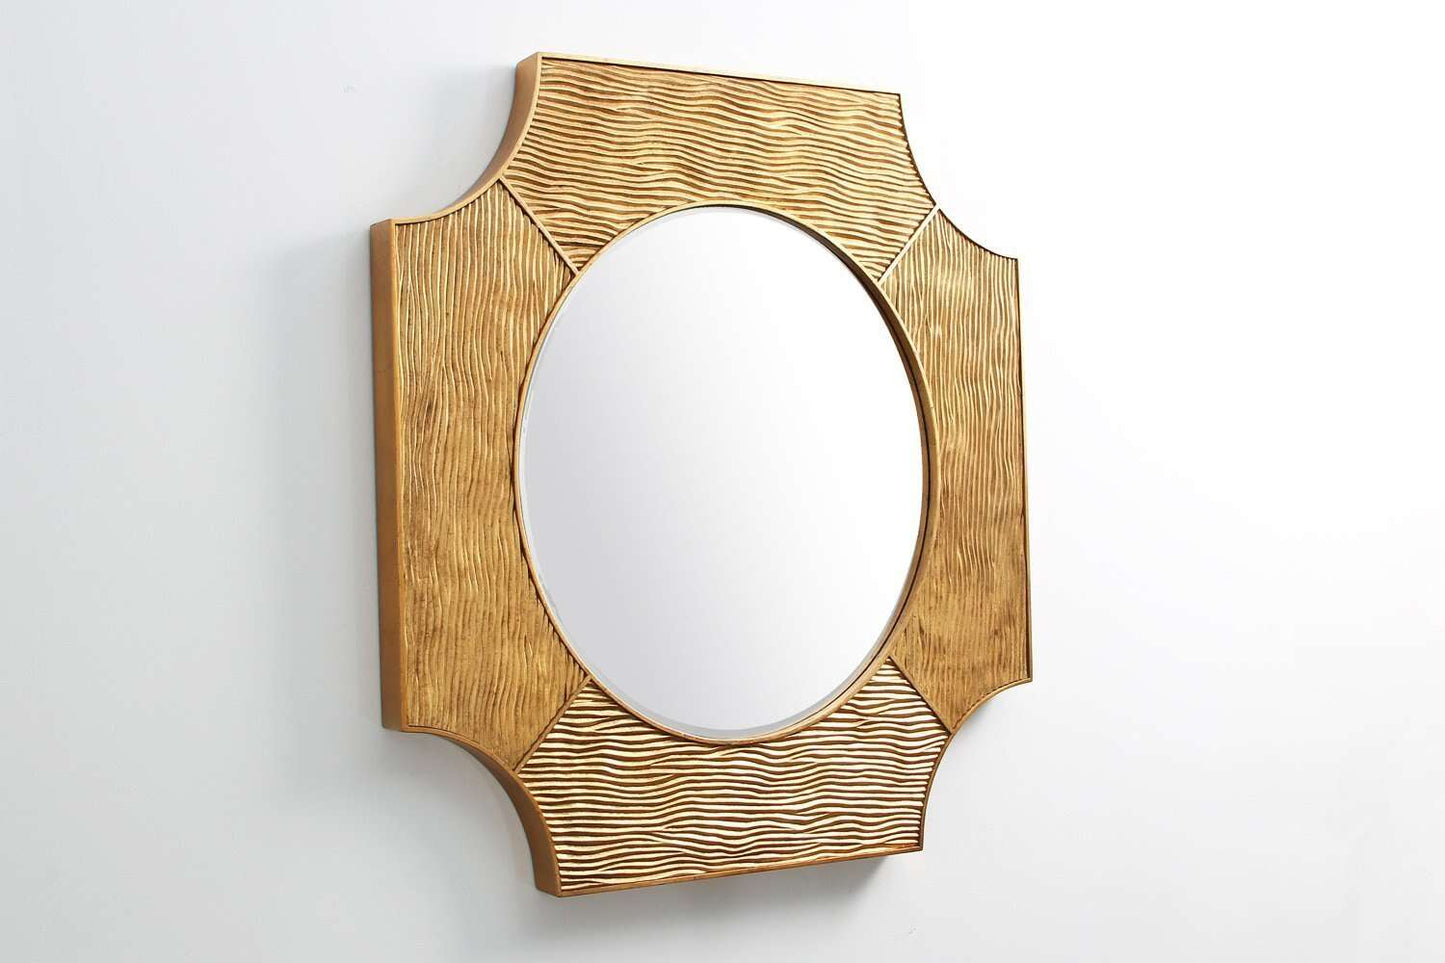 Lucas Wall Mirror in Antique Gold